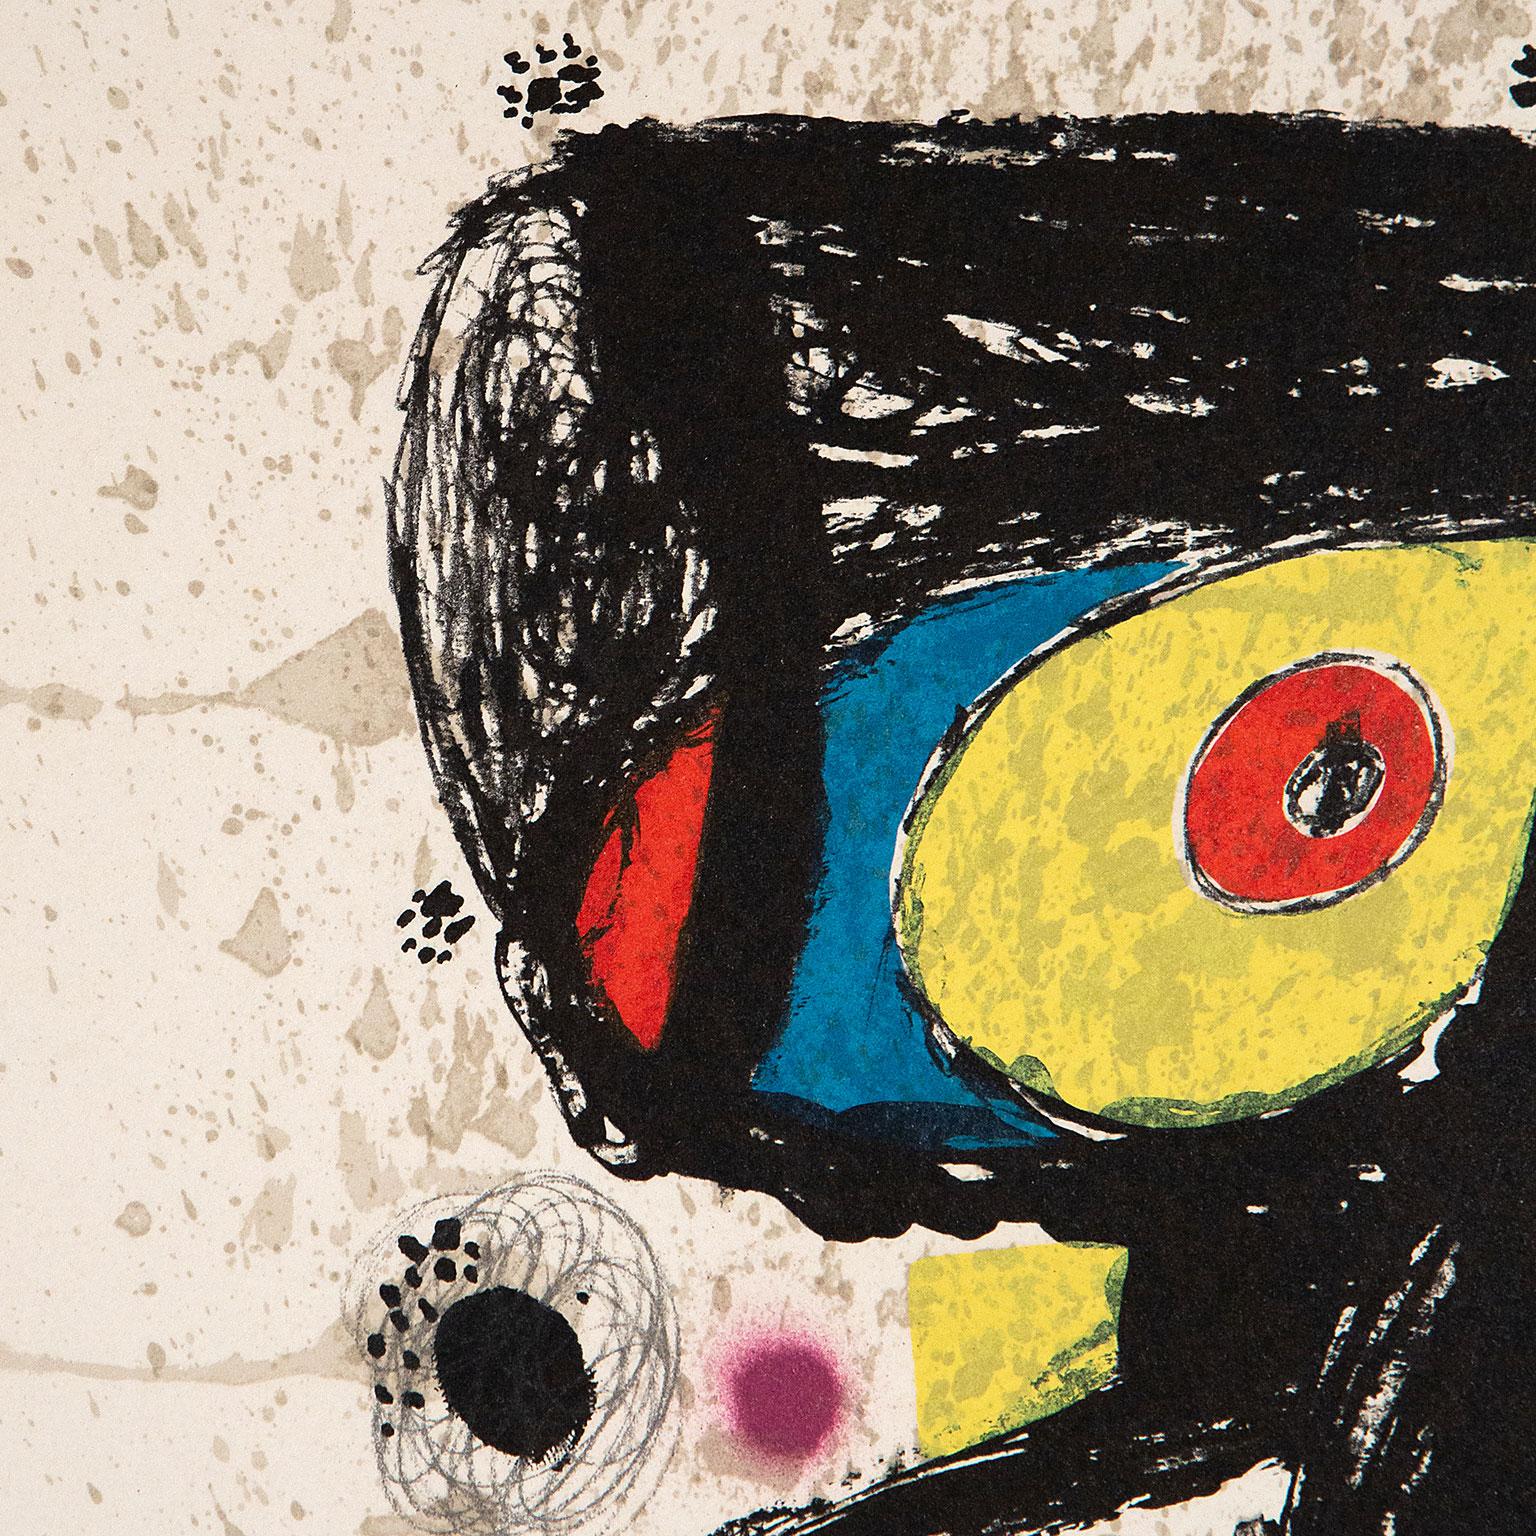 Joan Miró is one of the greatest artists of the 20th century. He is renowned internationally as a painter, sculptor, printmaker, and ceramicist.

Miró’s works, which are often at the intersection of Surrealism and abstraction, began receiving